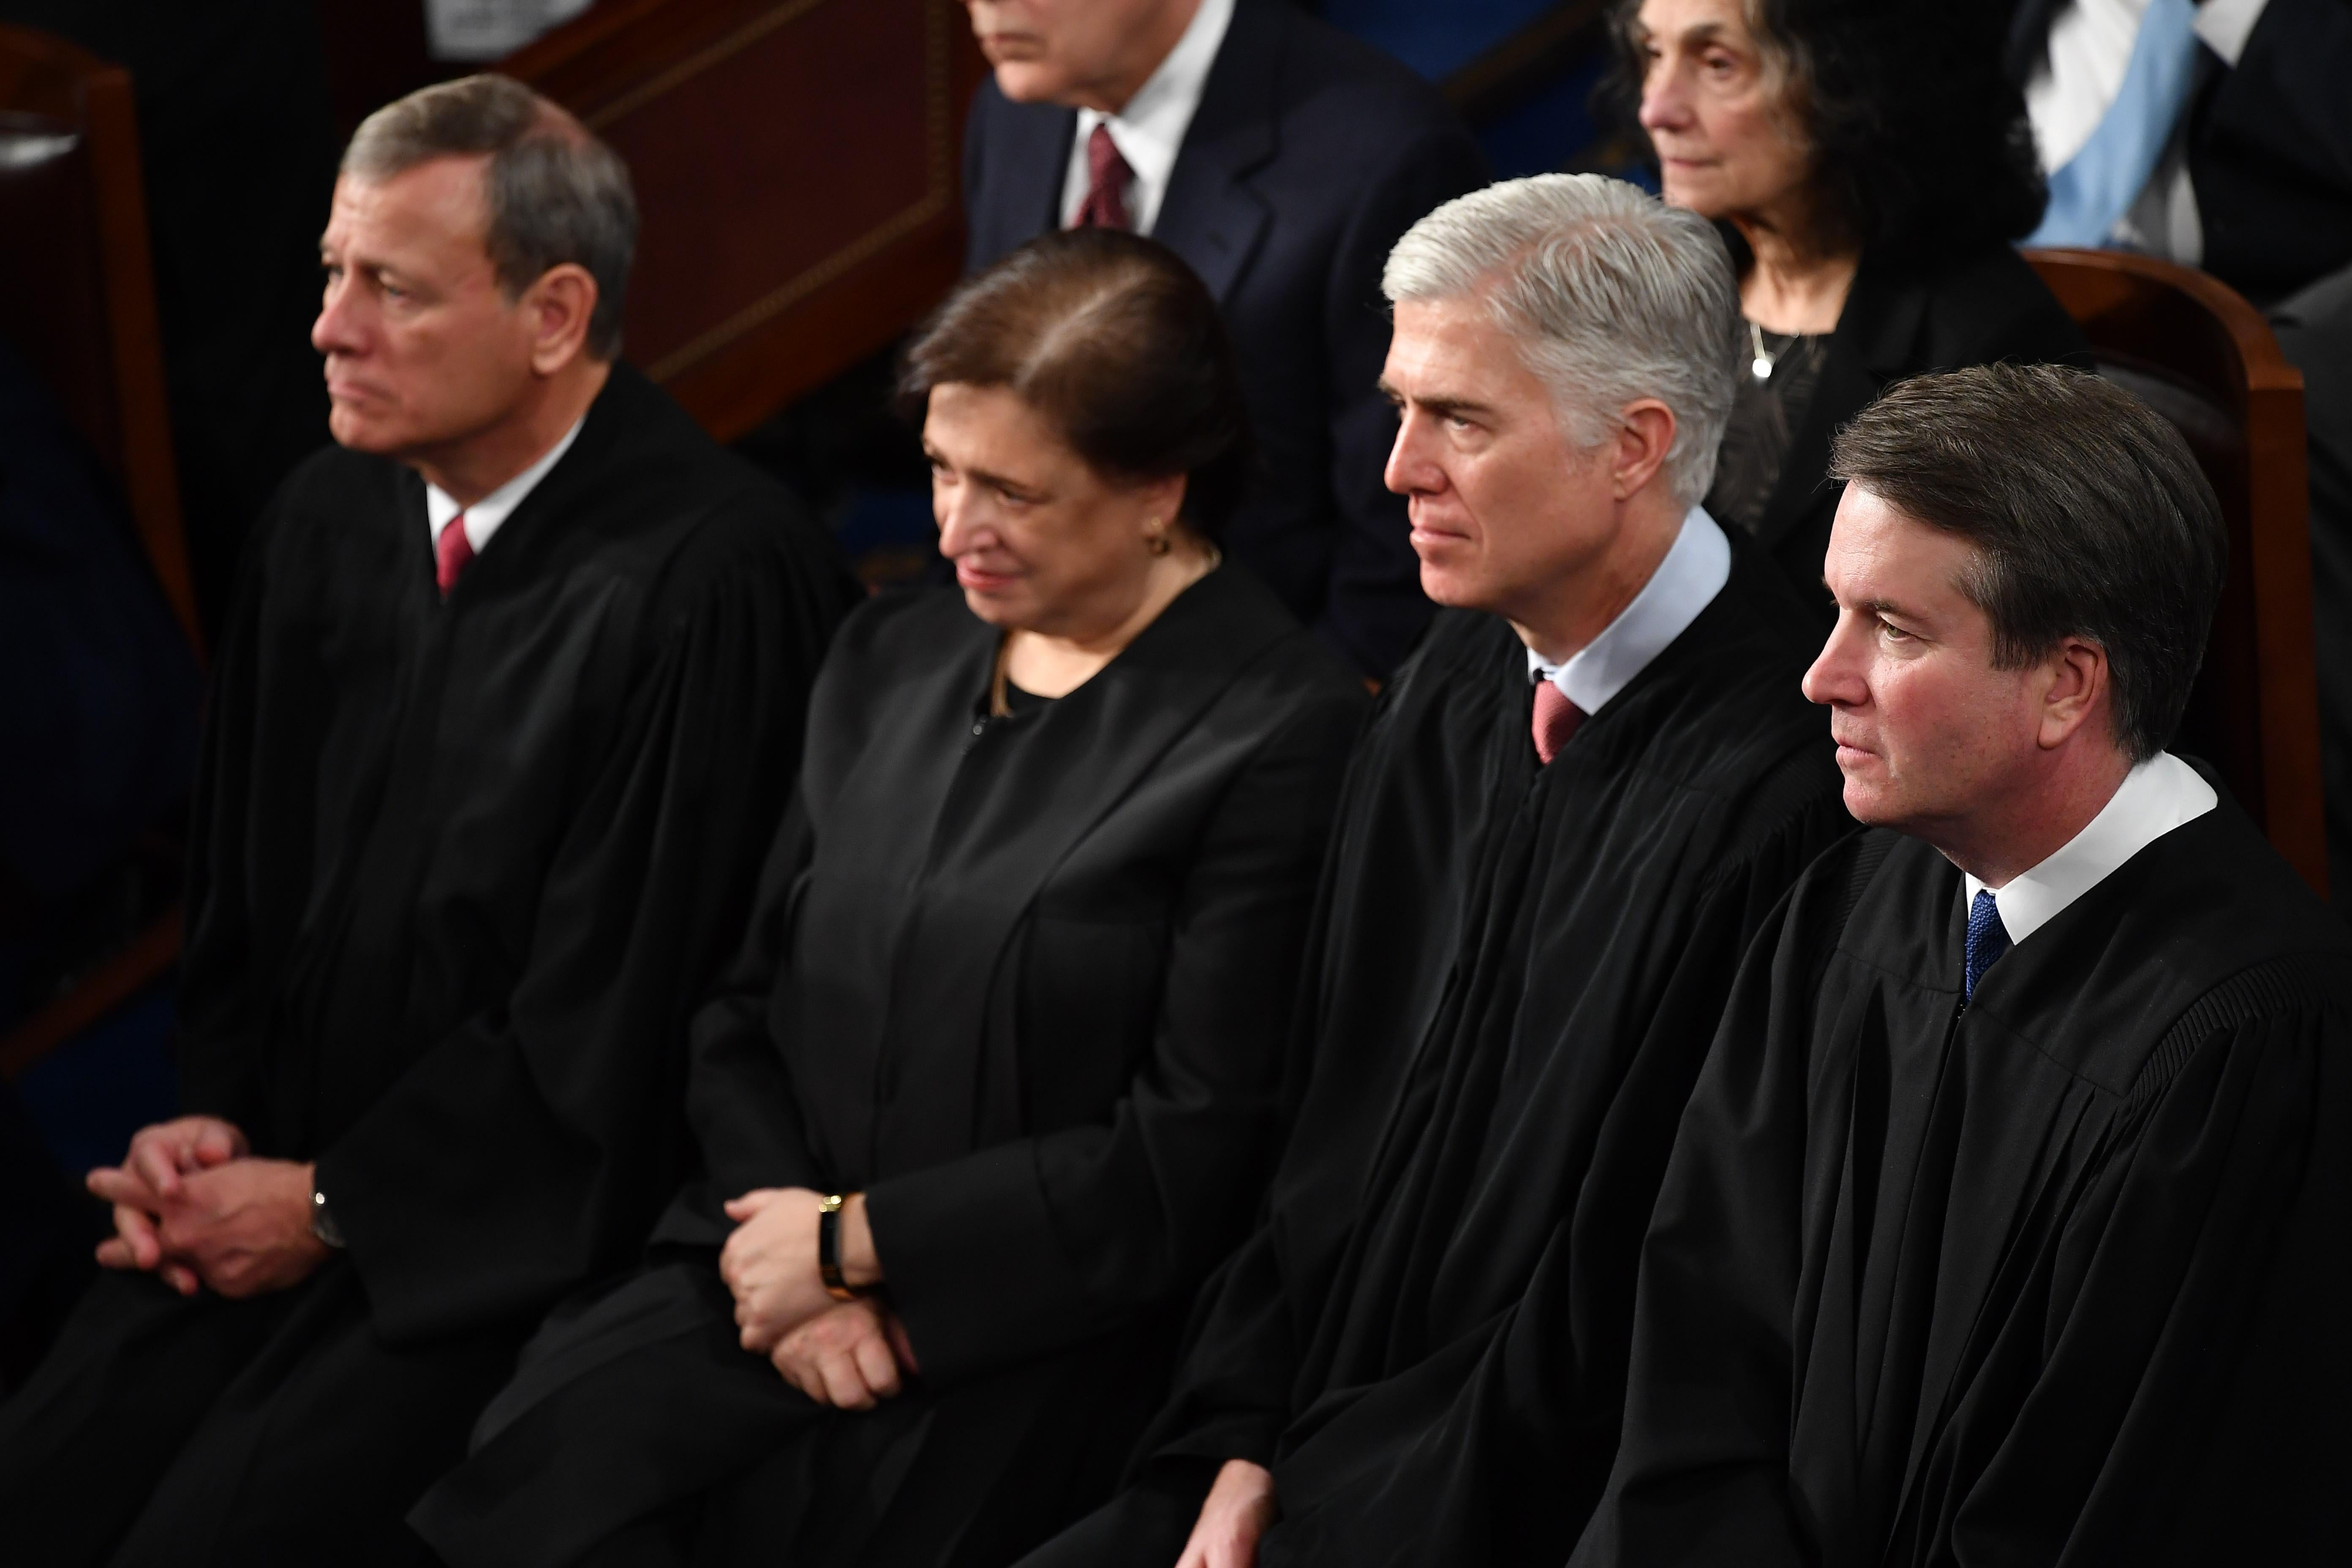 Four Supreme Justices in their justice robes listening intently.